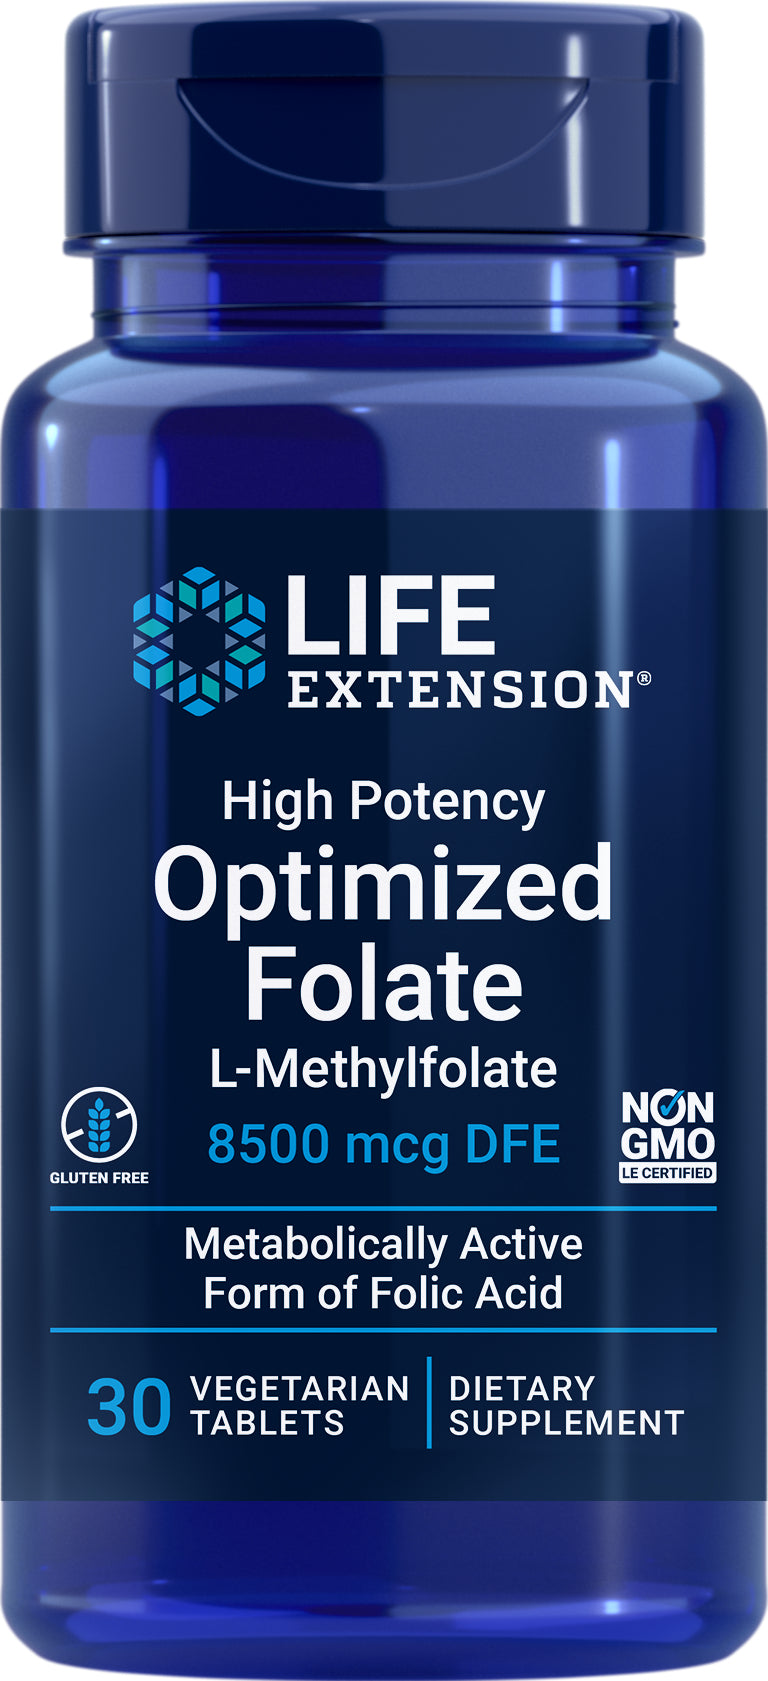 High Potency Optimized Folate 8500 mcg DFE, 30 veg tabs by Life Extension